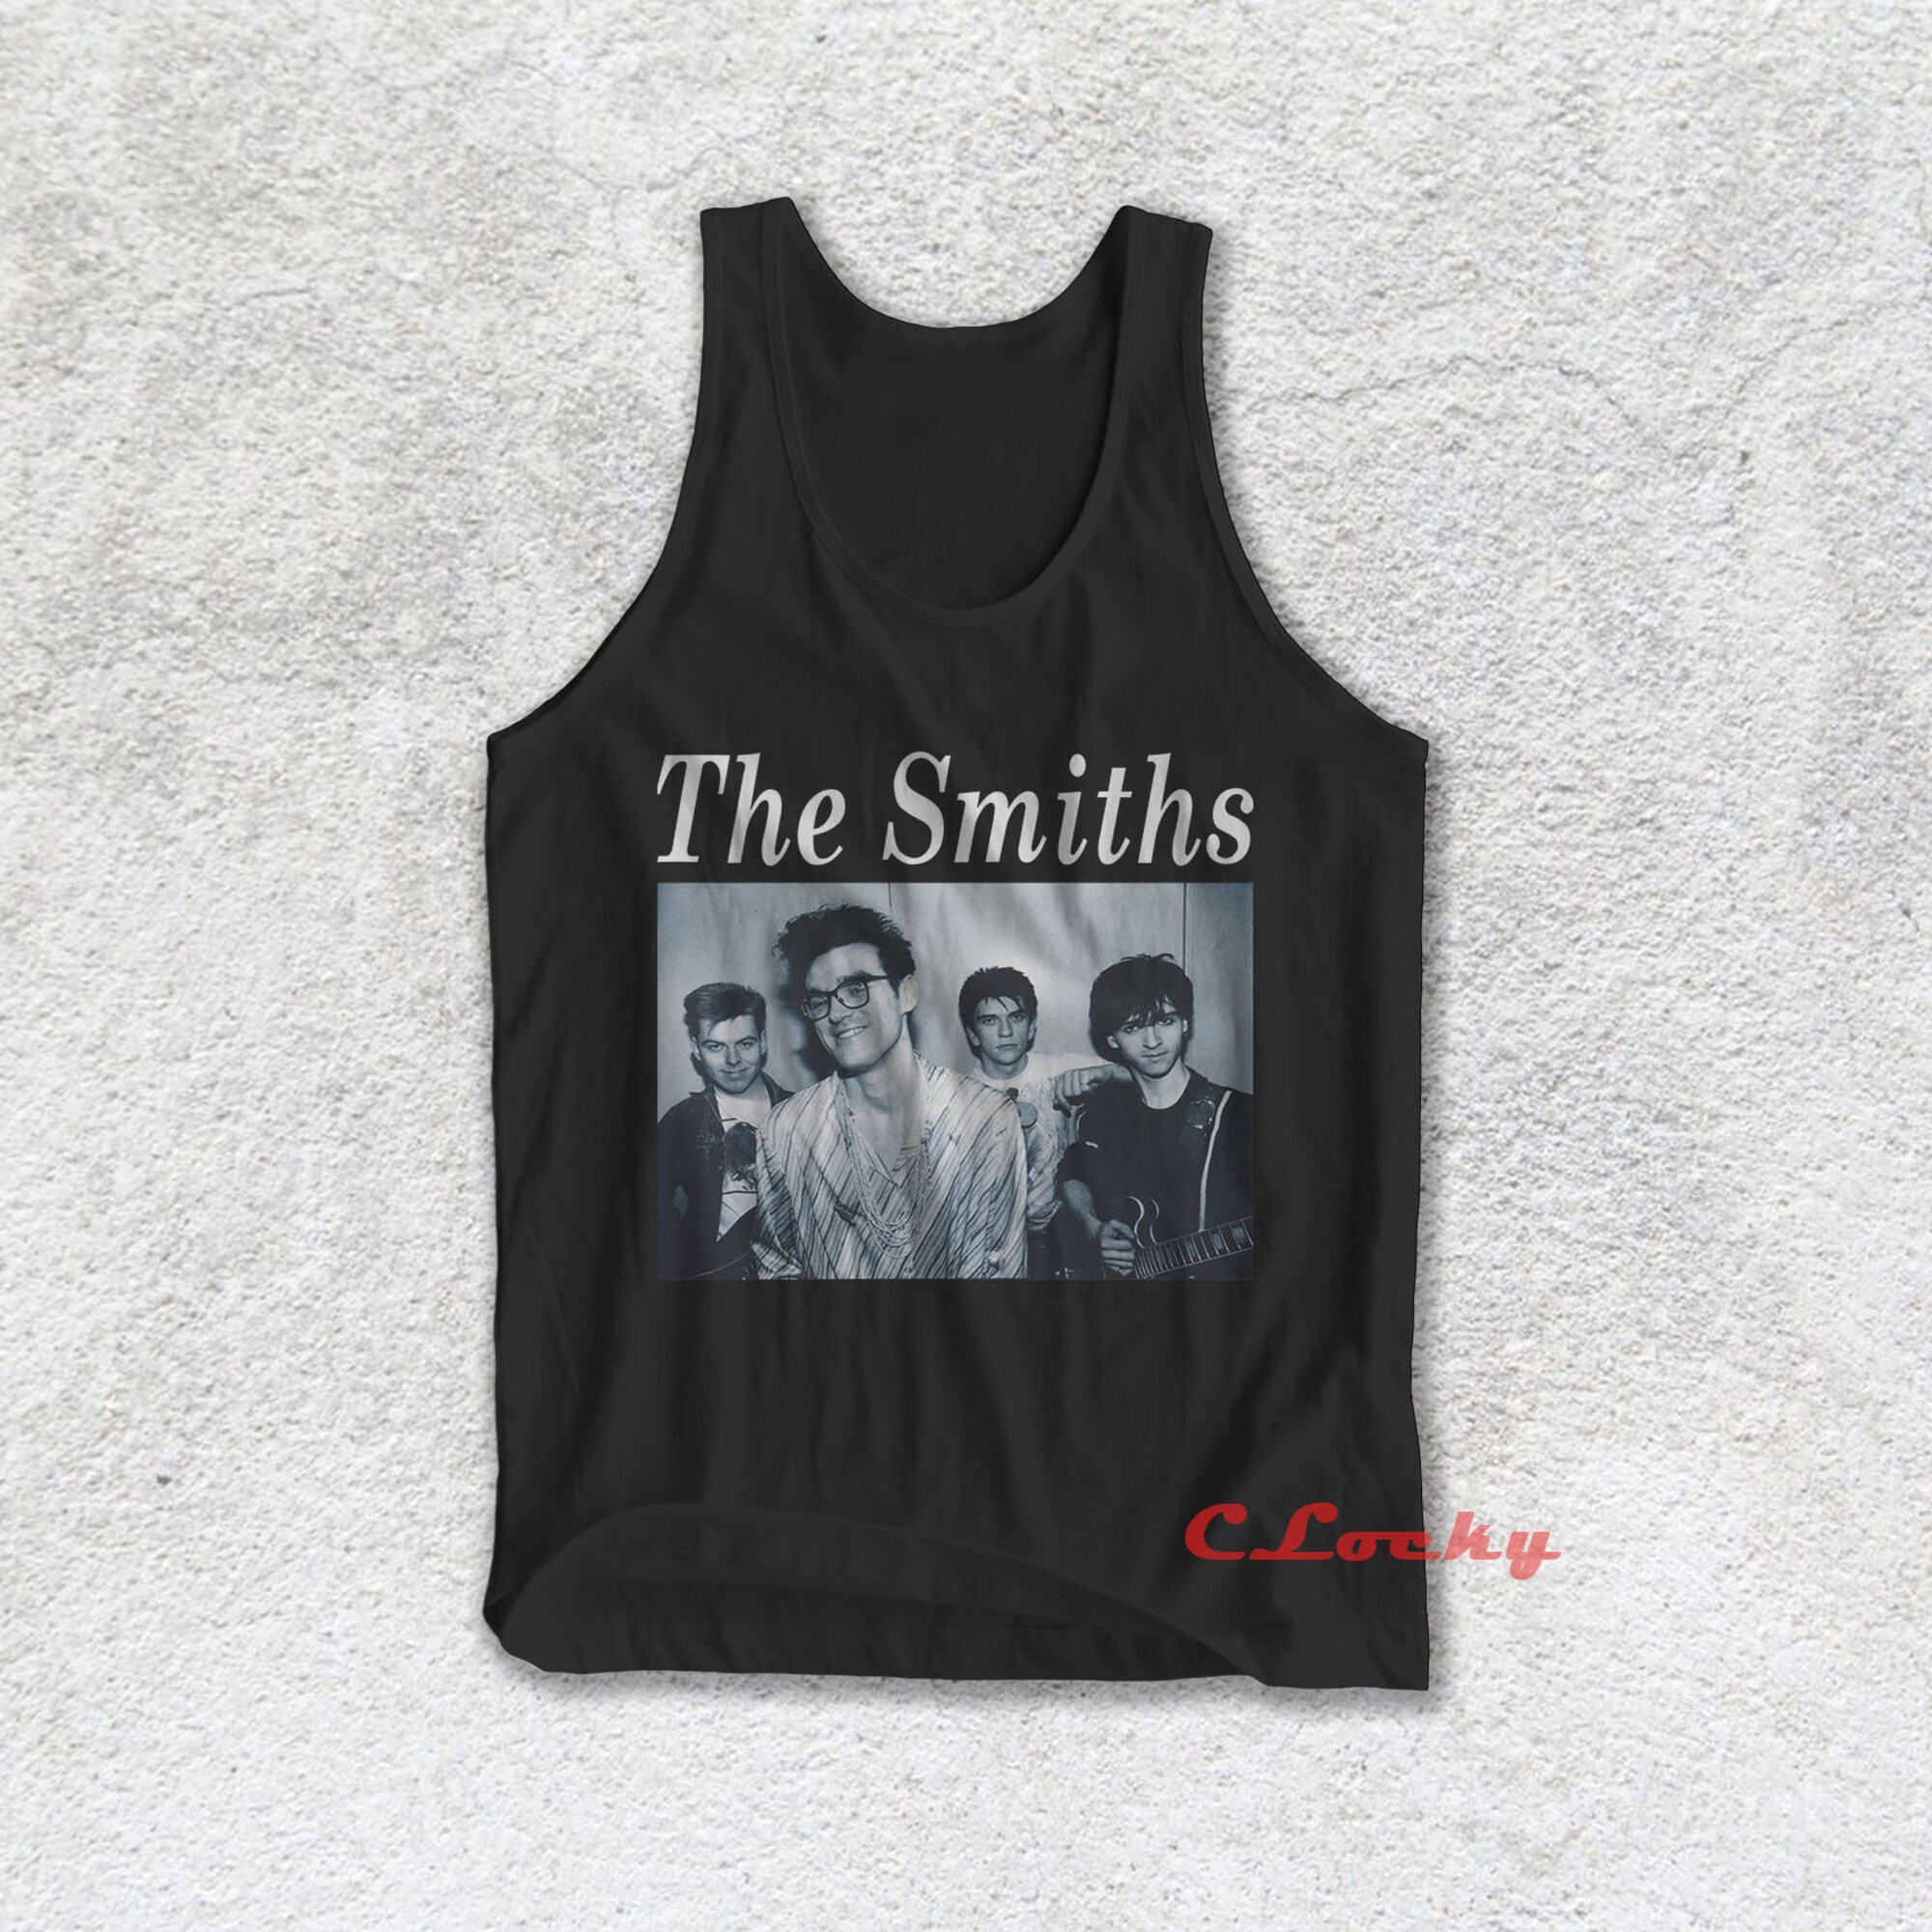 The Smiths Tank Top English Rock Indie Rock Post Punk Morrissey Music Band Tank top